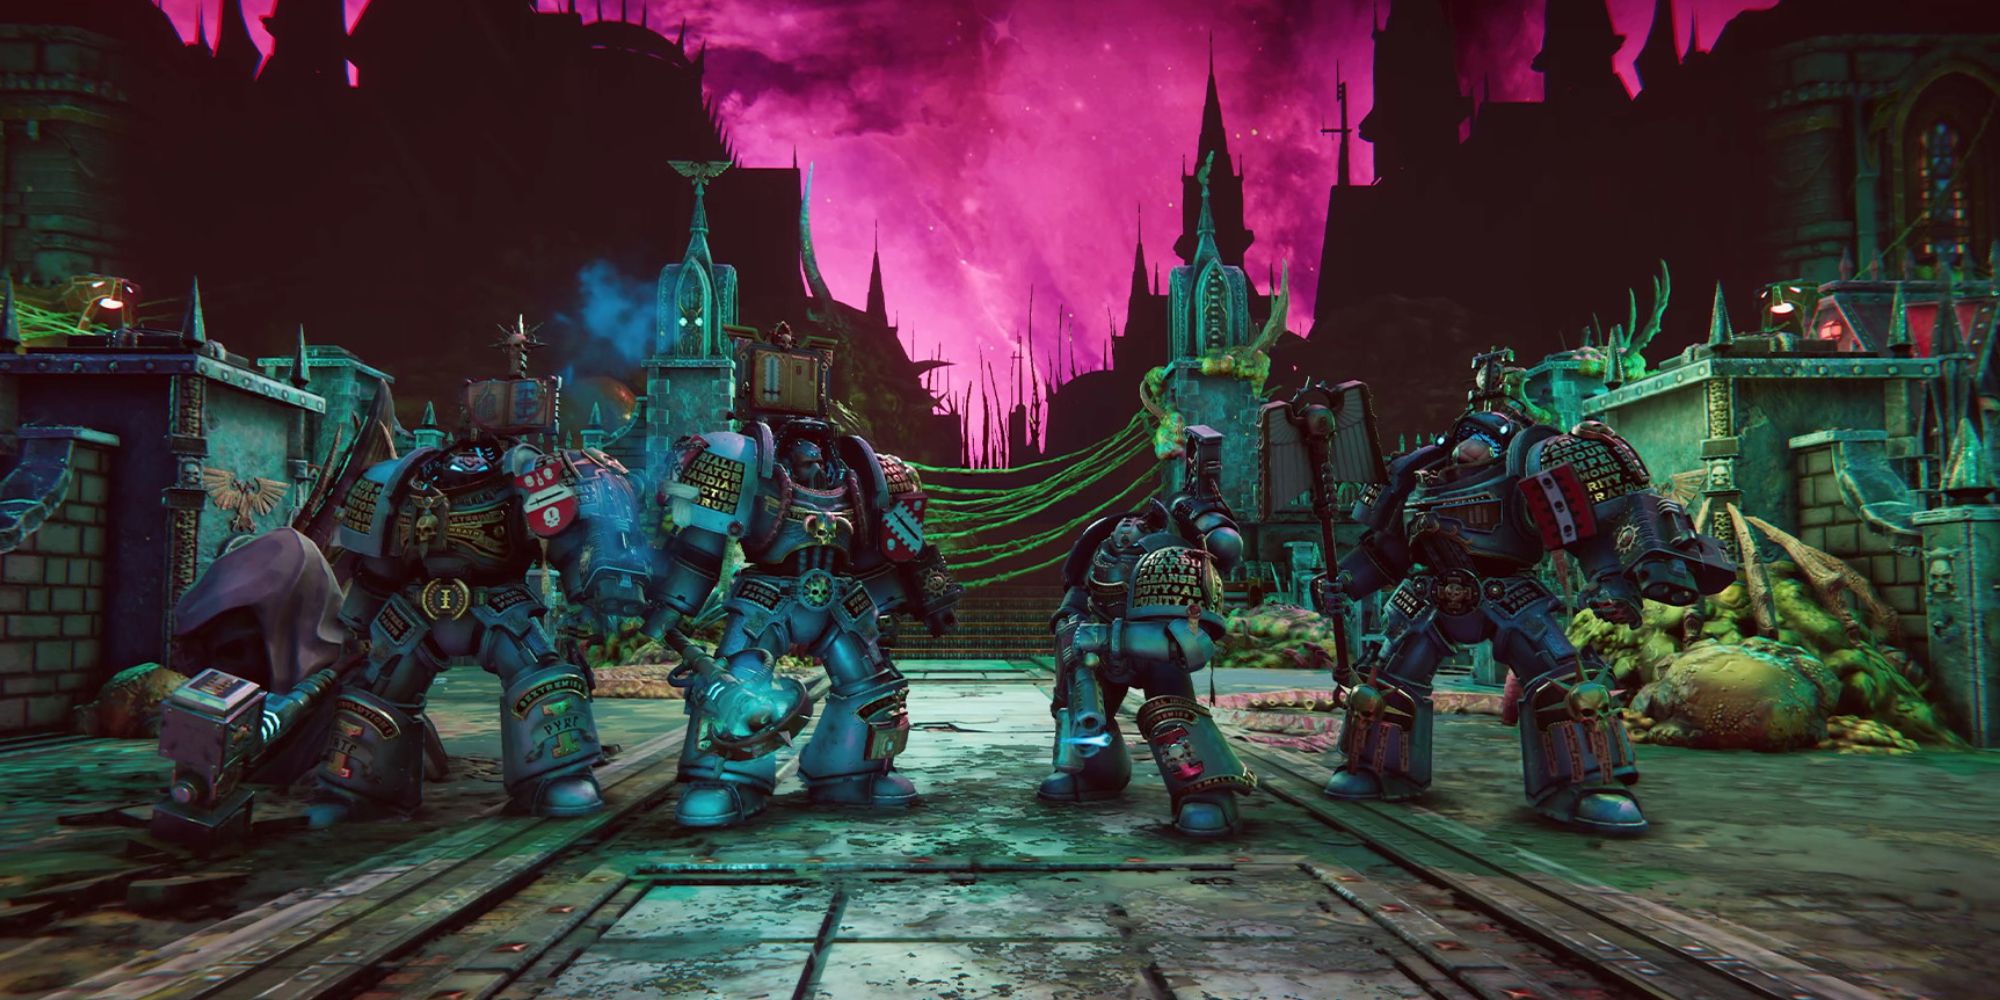 Warhammer 40,000: Chaos Gate - Daemonhunters instal the last version for apple